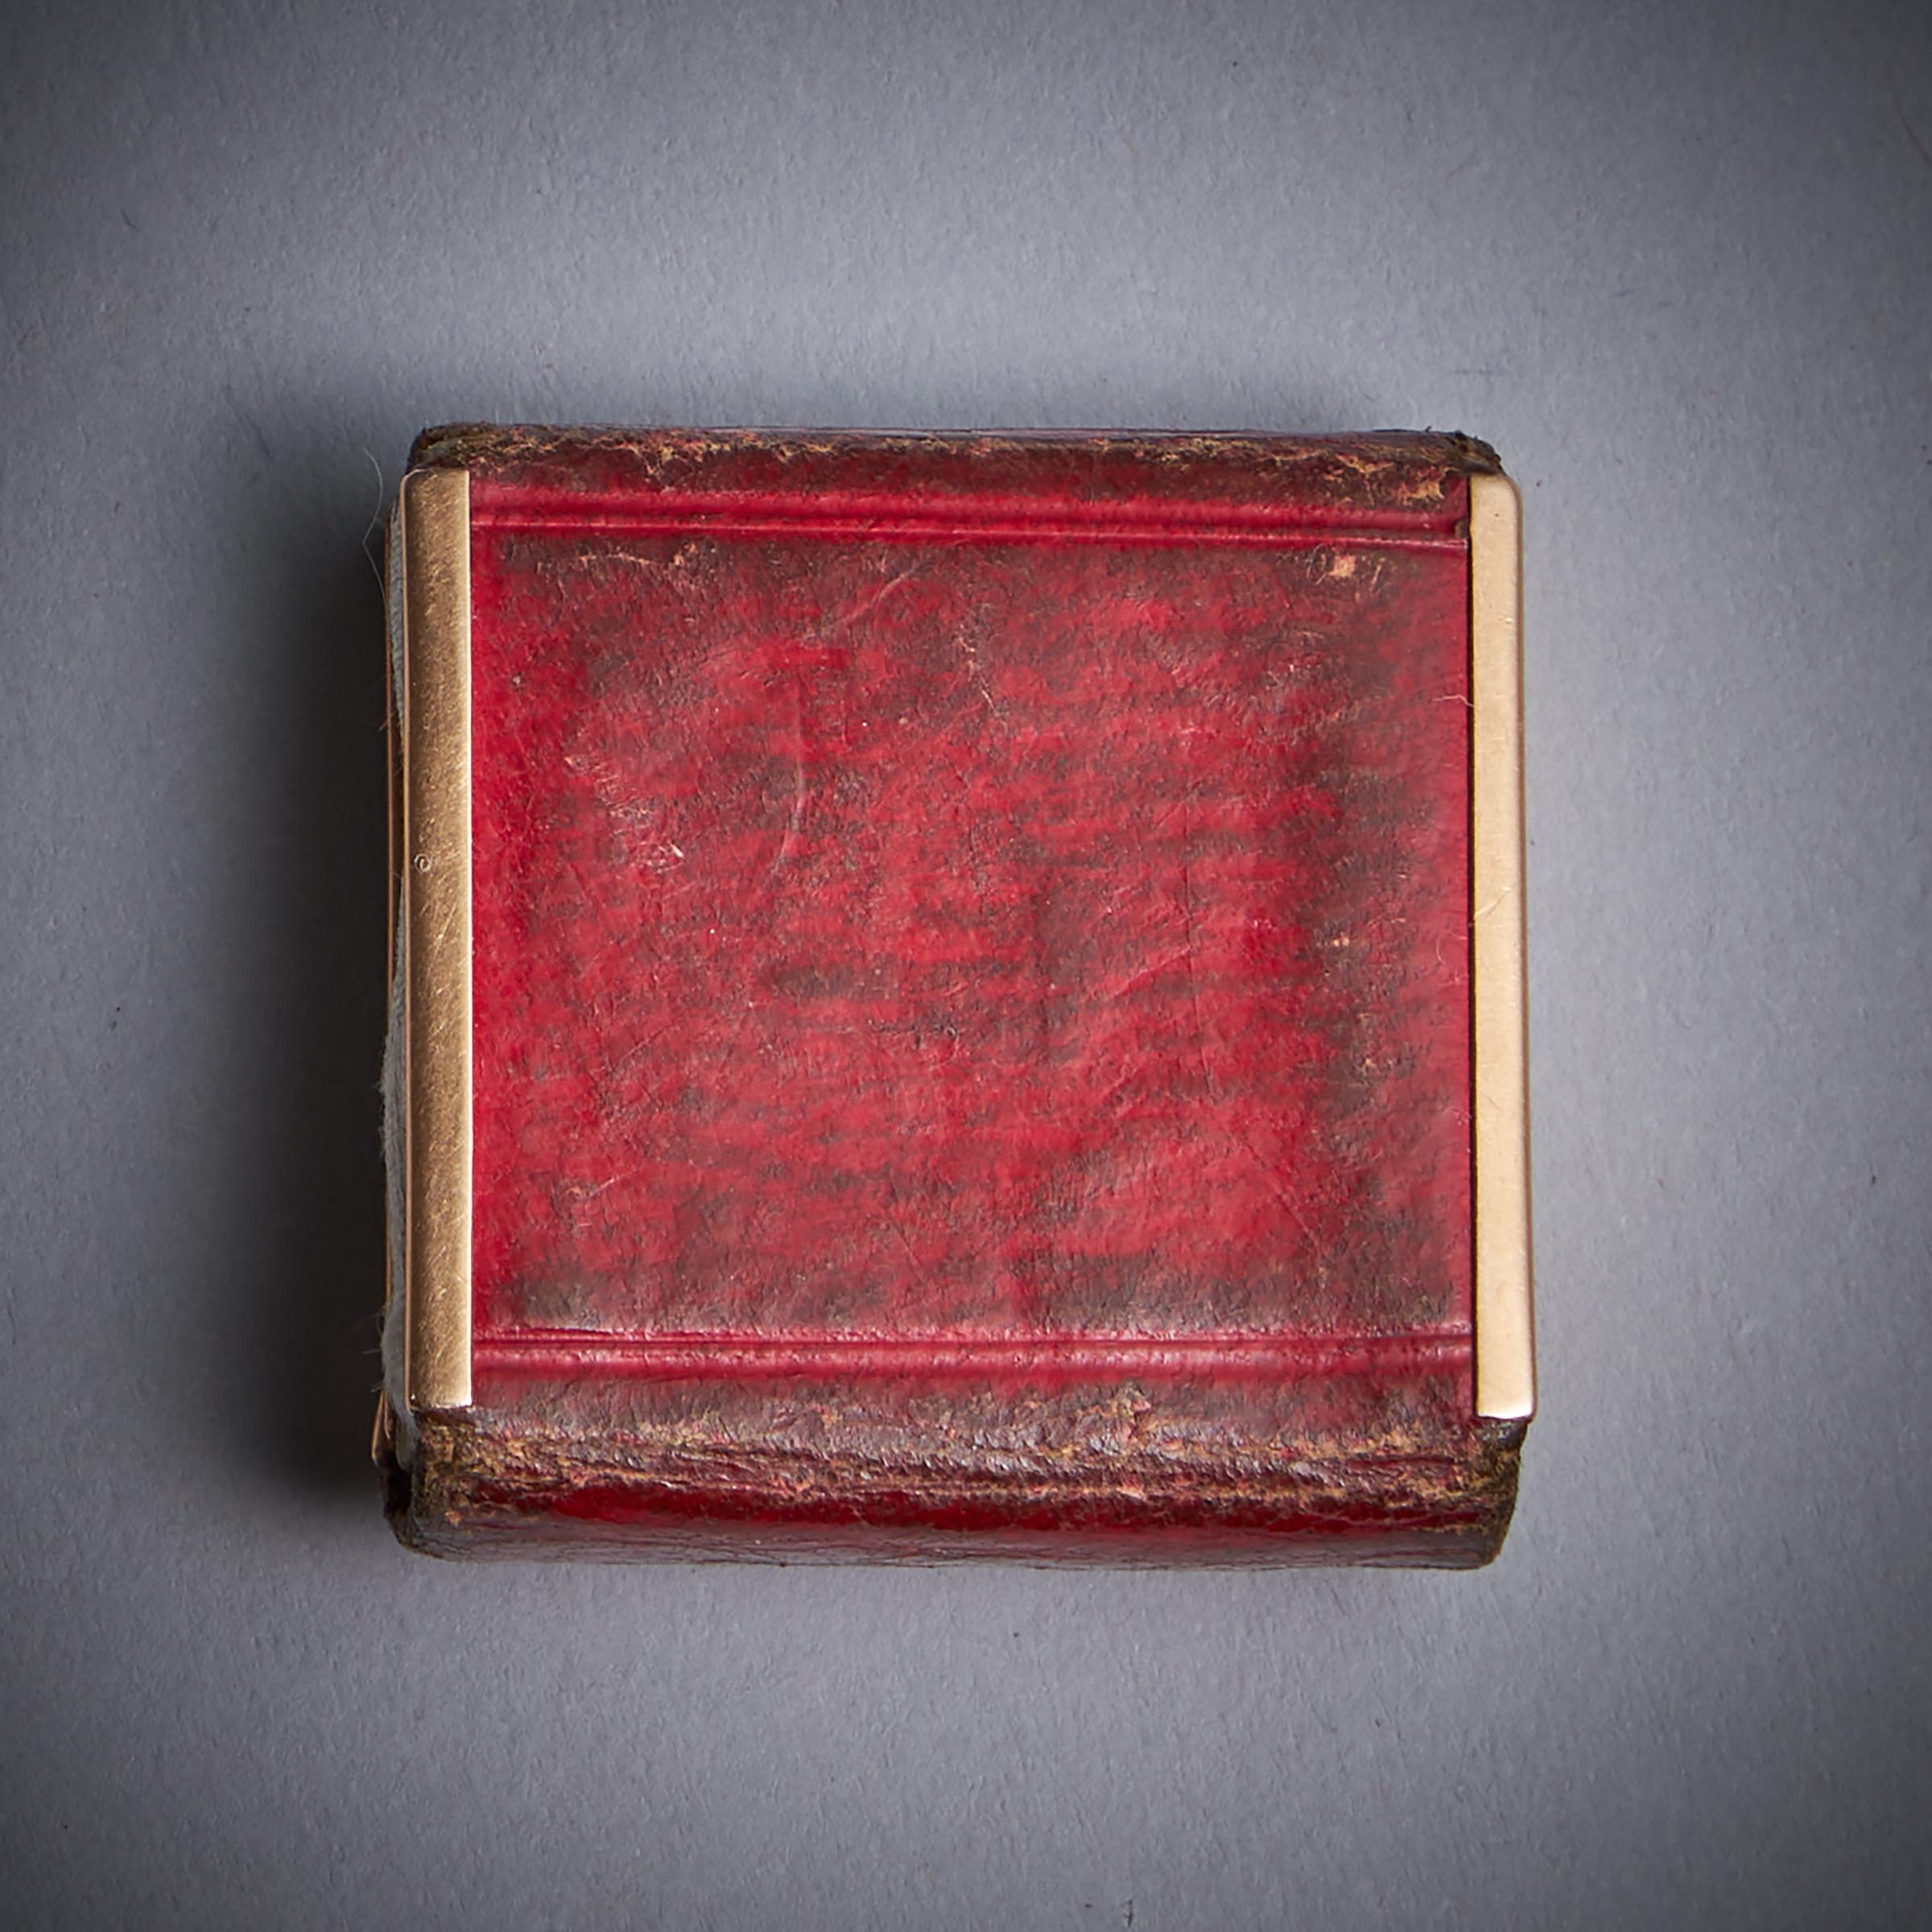 Or From Queen Charlotte, A Rare Miniature Gold Mounted George III Almanac, 1817 en vente